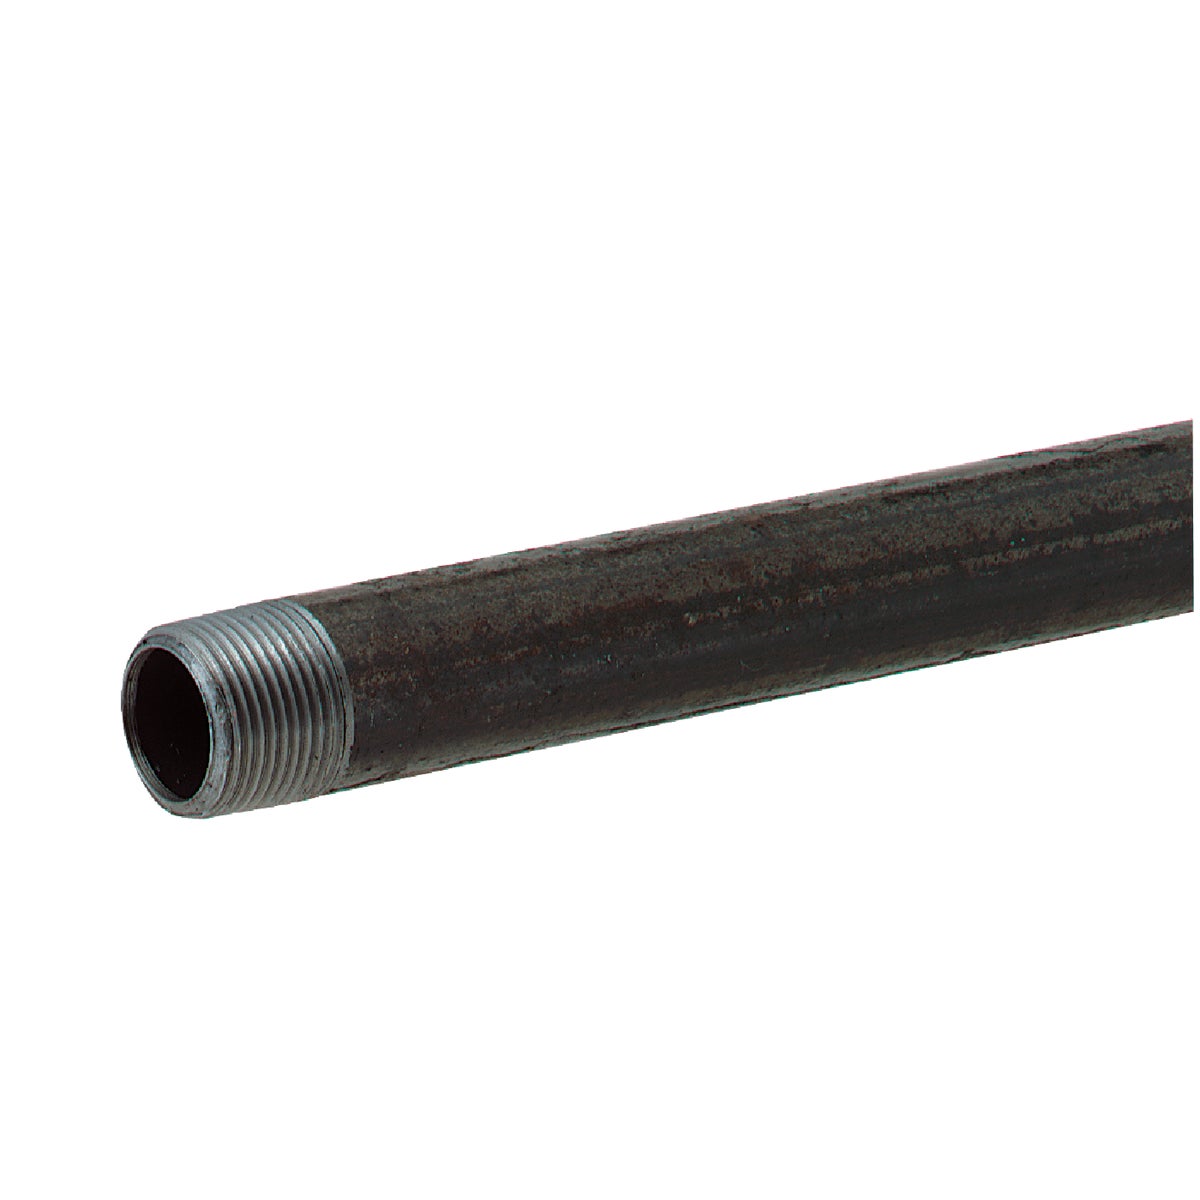 1-1/2X24 BLK RDI-CT PIPE